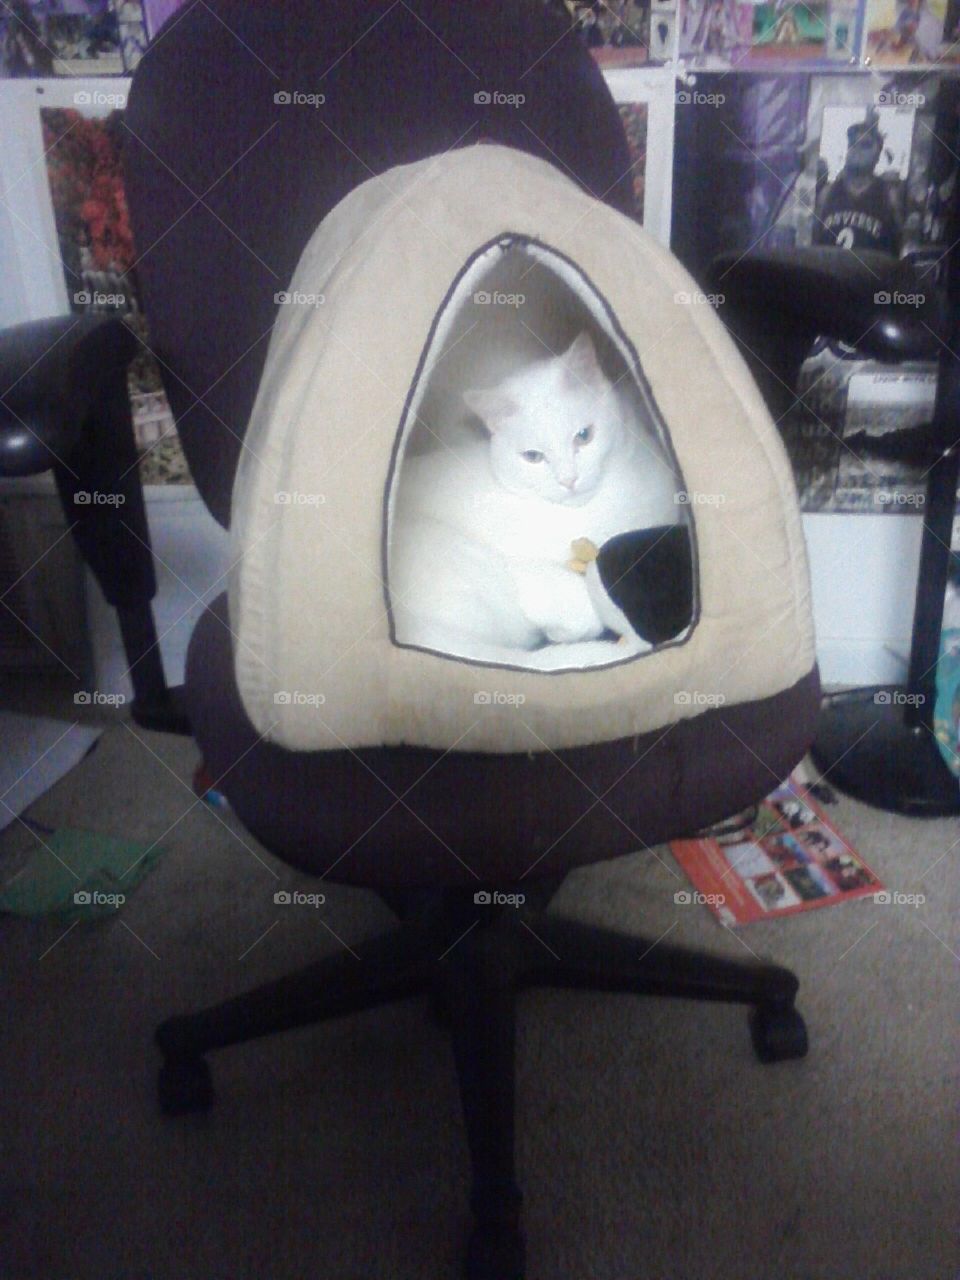 Korin, sitting in his house